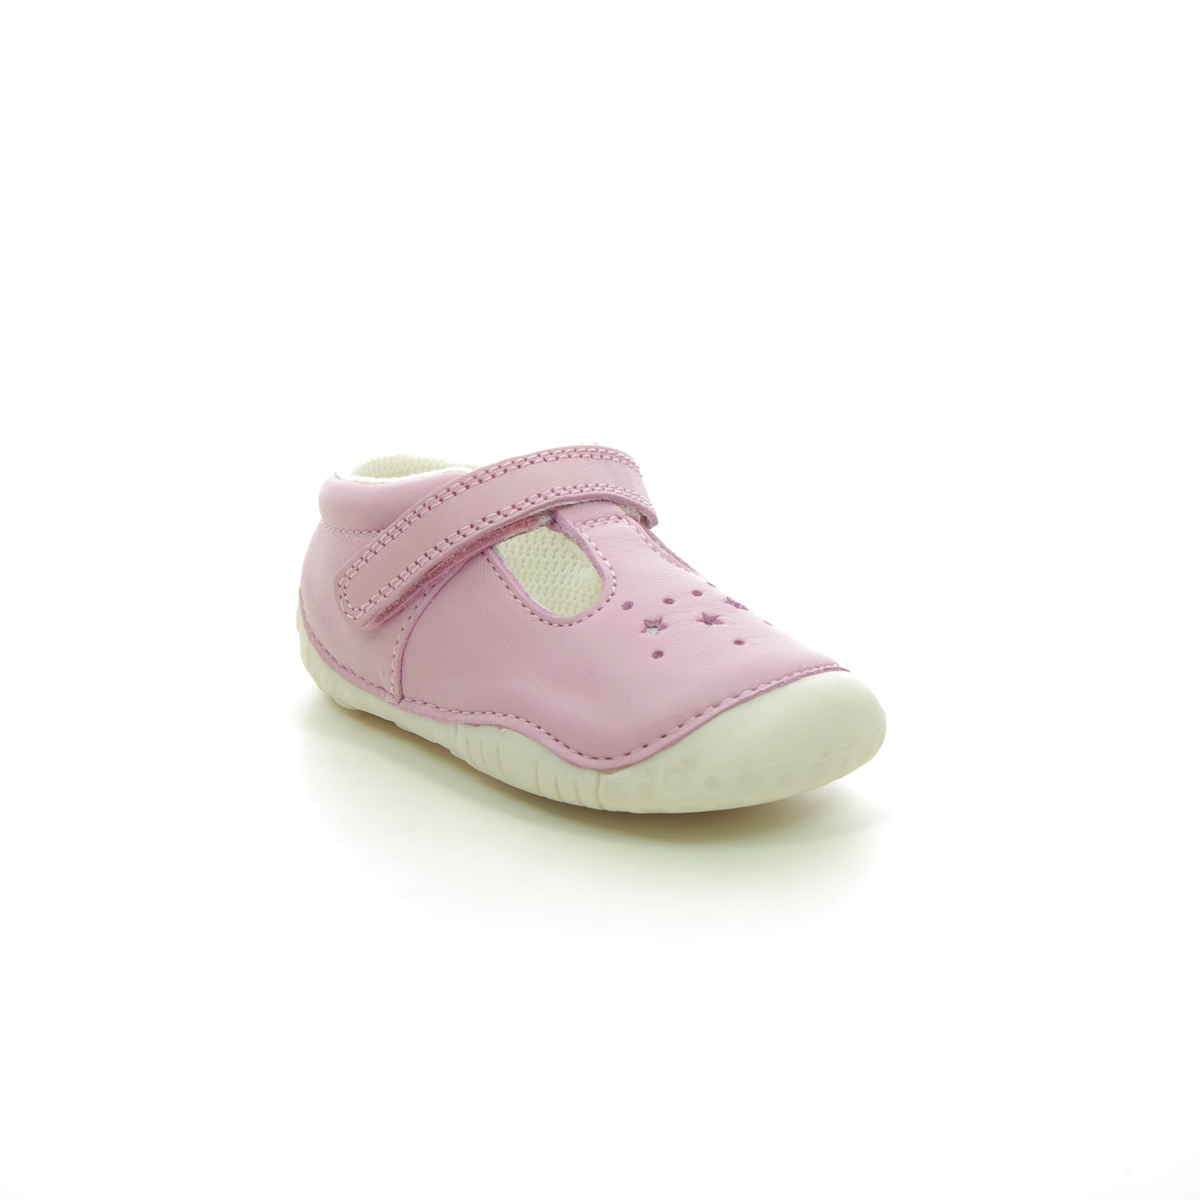 Start Rite - Tumble T Bar In Pink Leather 0761-66F In Size 3.5 In Plain Pink Leather First And Baby Shoes  In Pink Leather For kids